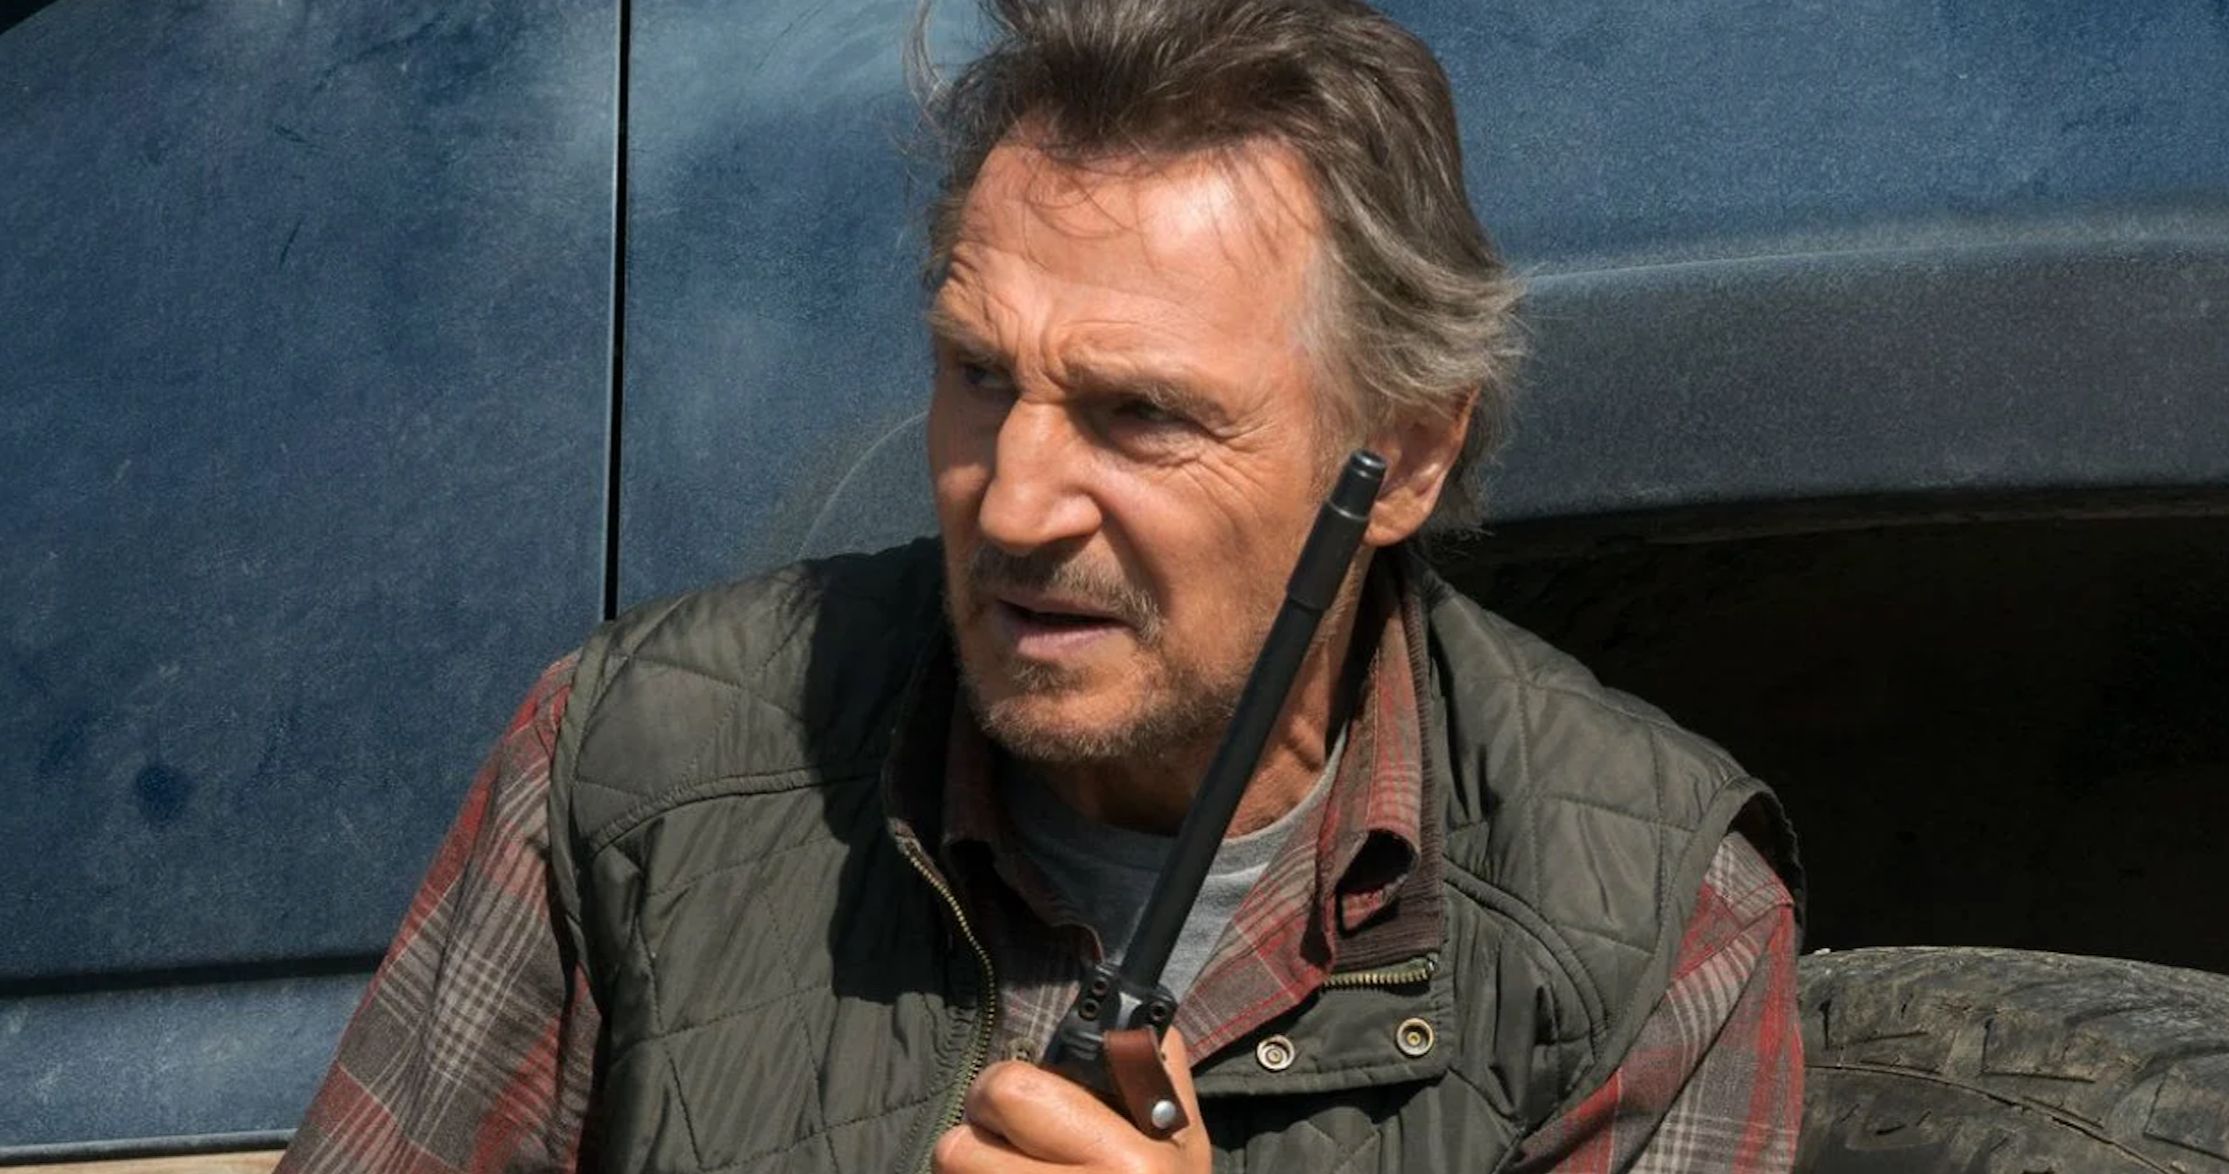 Liam Neeson's The Marksman Wins Second Weekend Box Office with Just $2M